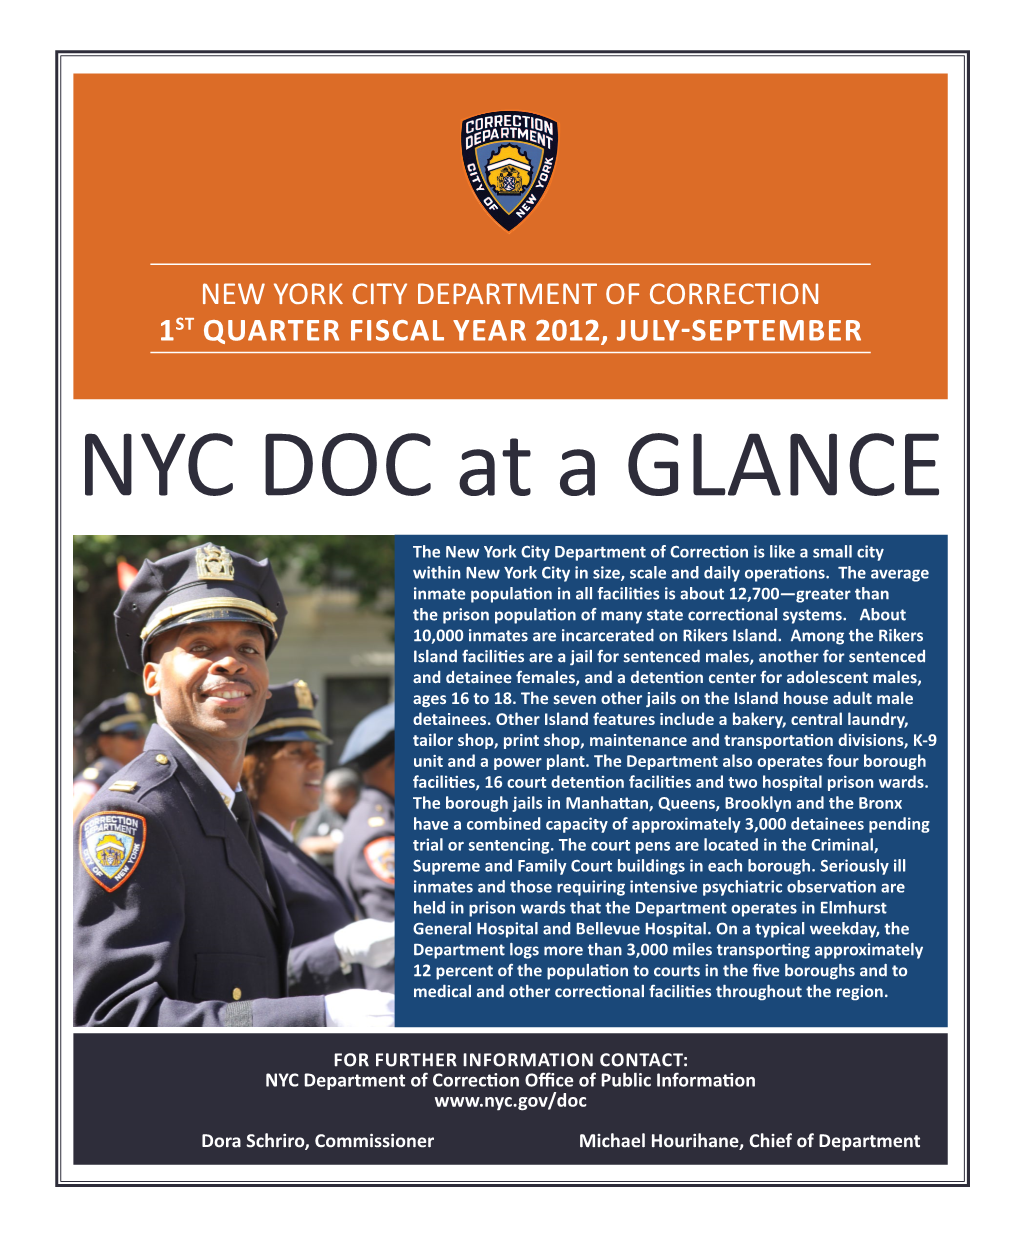 NYC DOC at a GLANCE